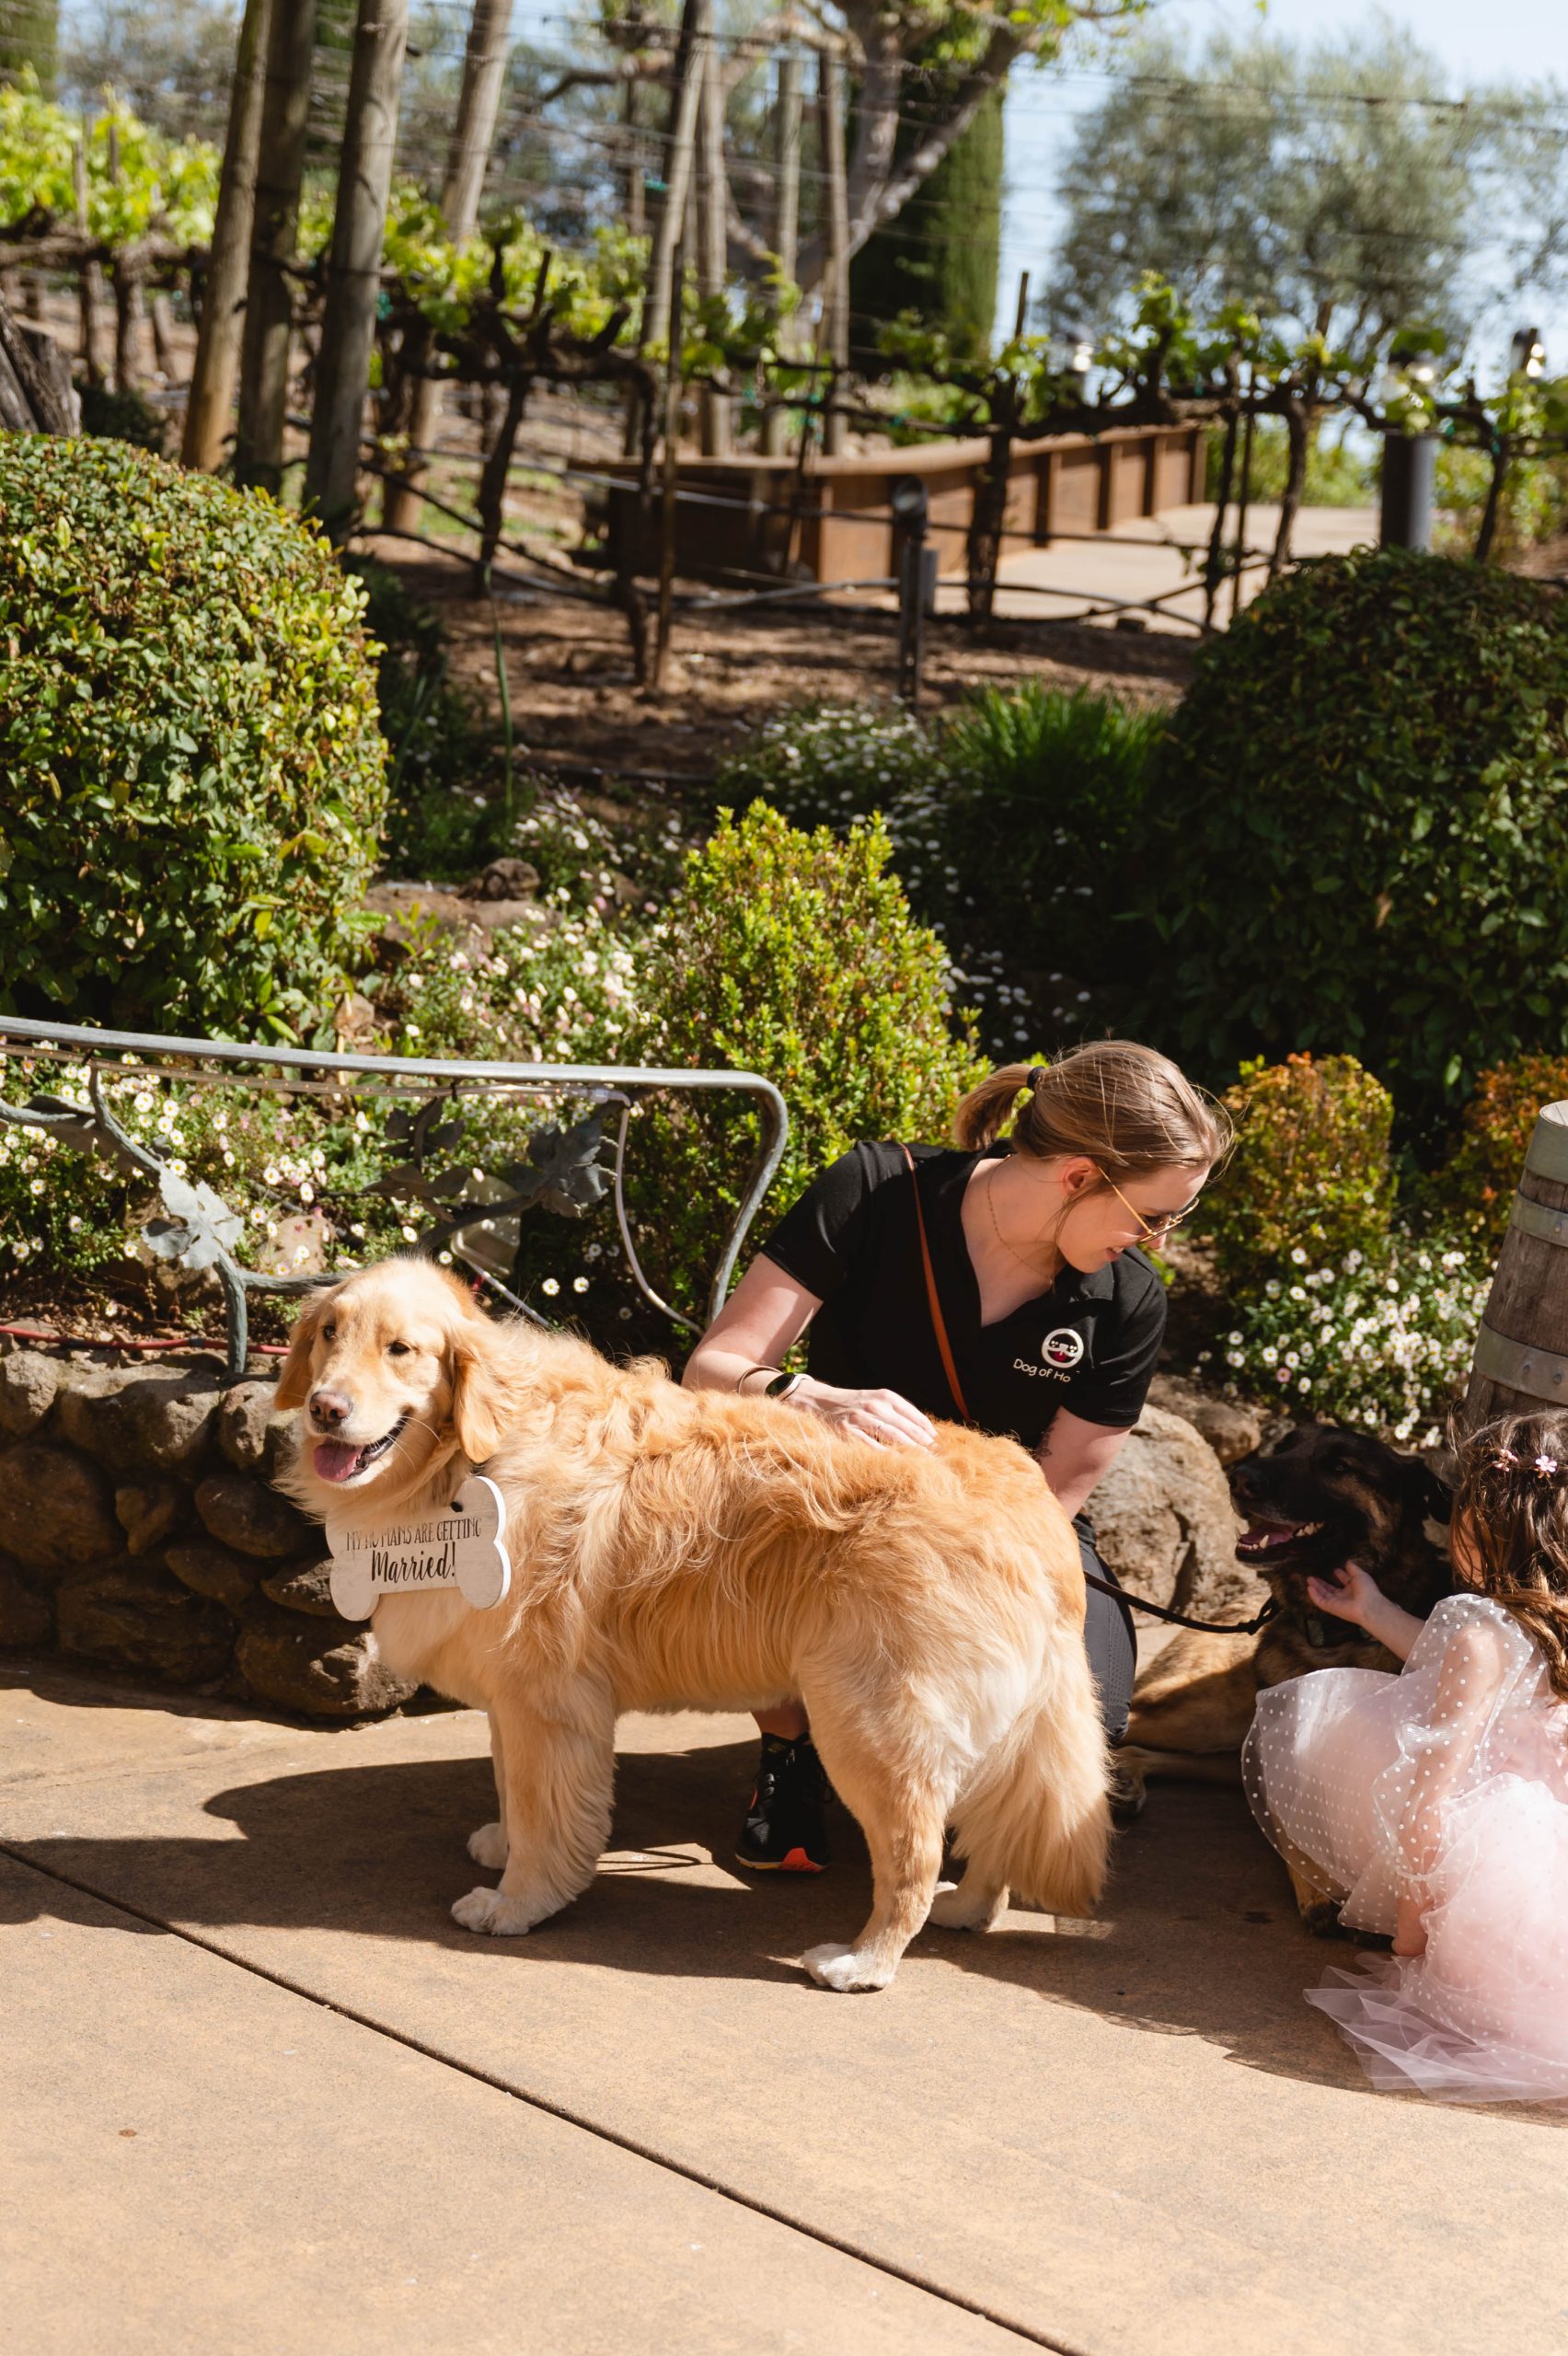 Dog of Honor- and baby sitters that did such a wonderful job caring for the dogs Soft Romantic + Minimalistic Wedding at Viansa Winery in Sonoma Jen Vazquez Photography